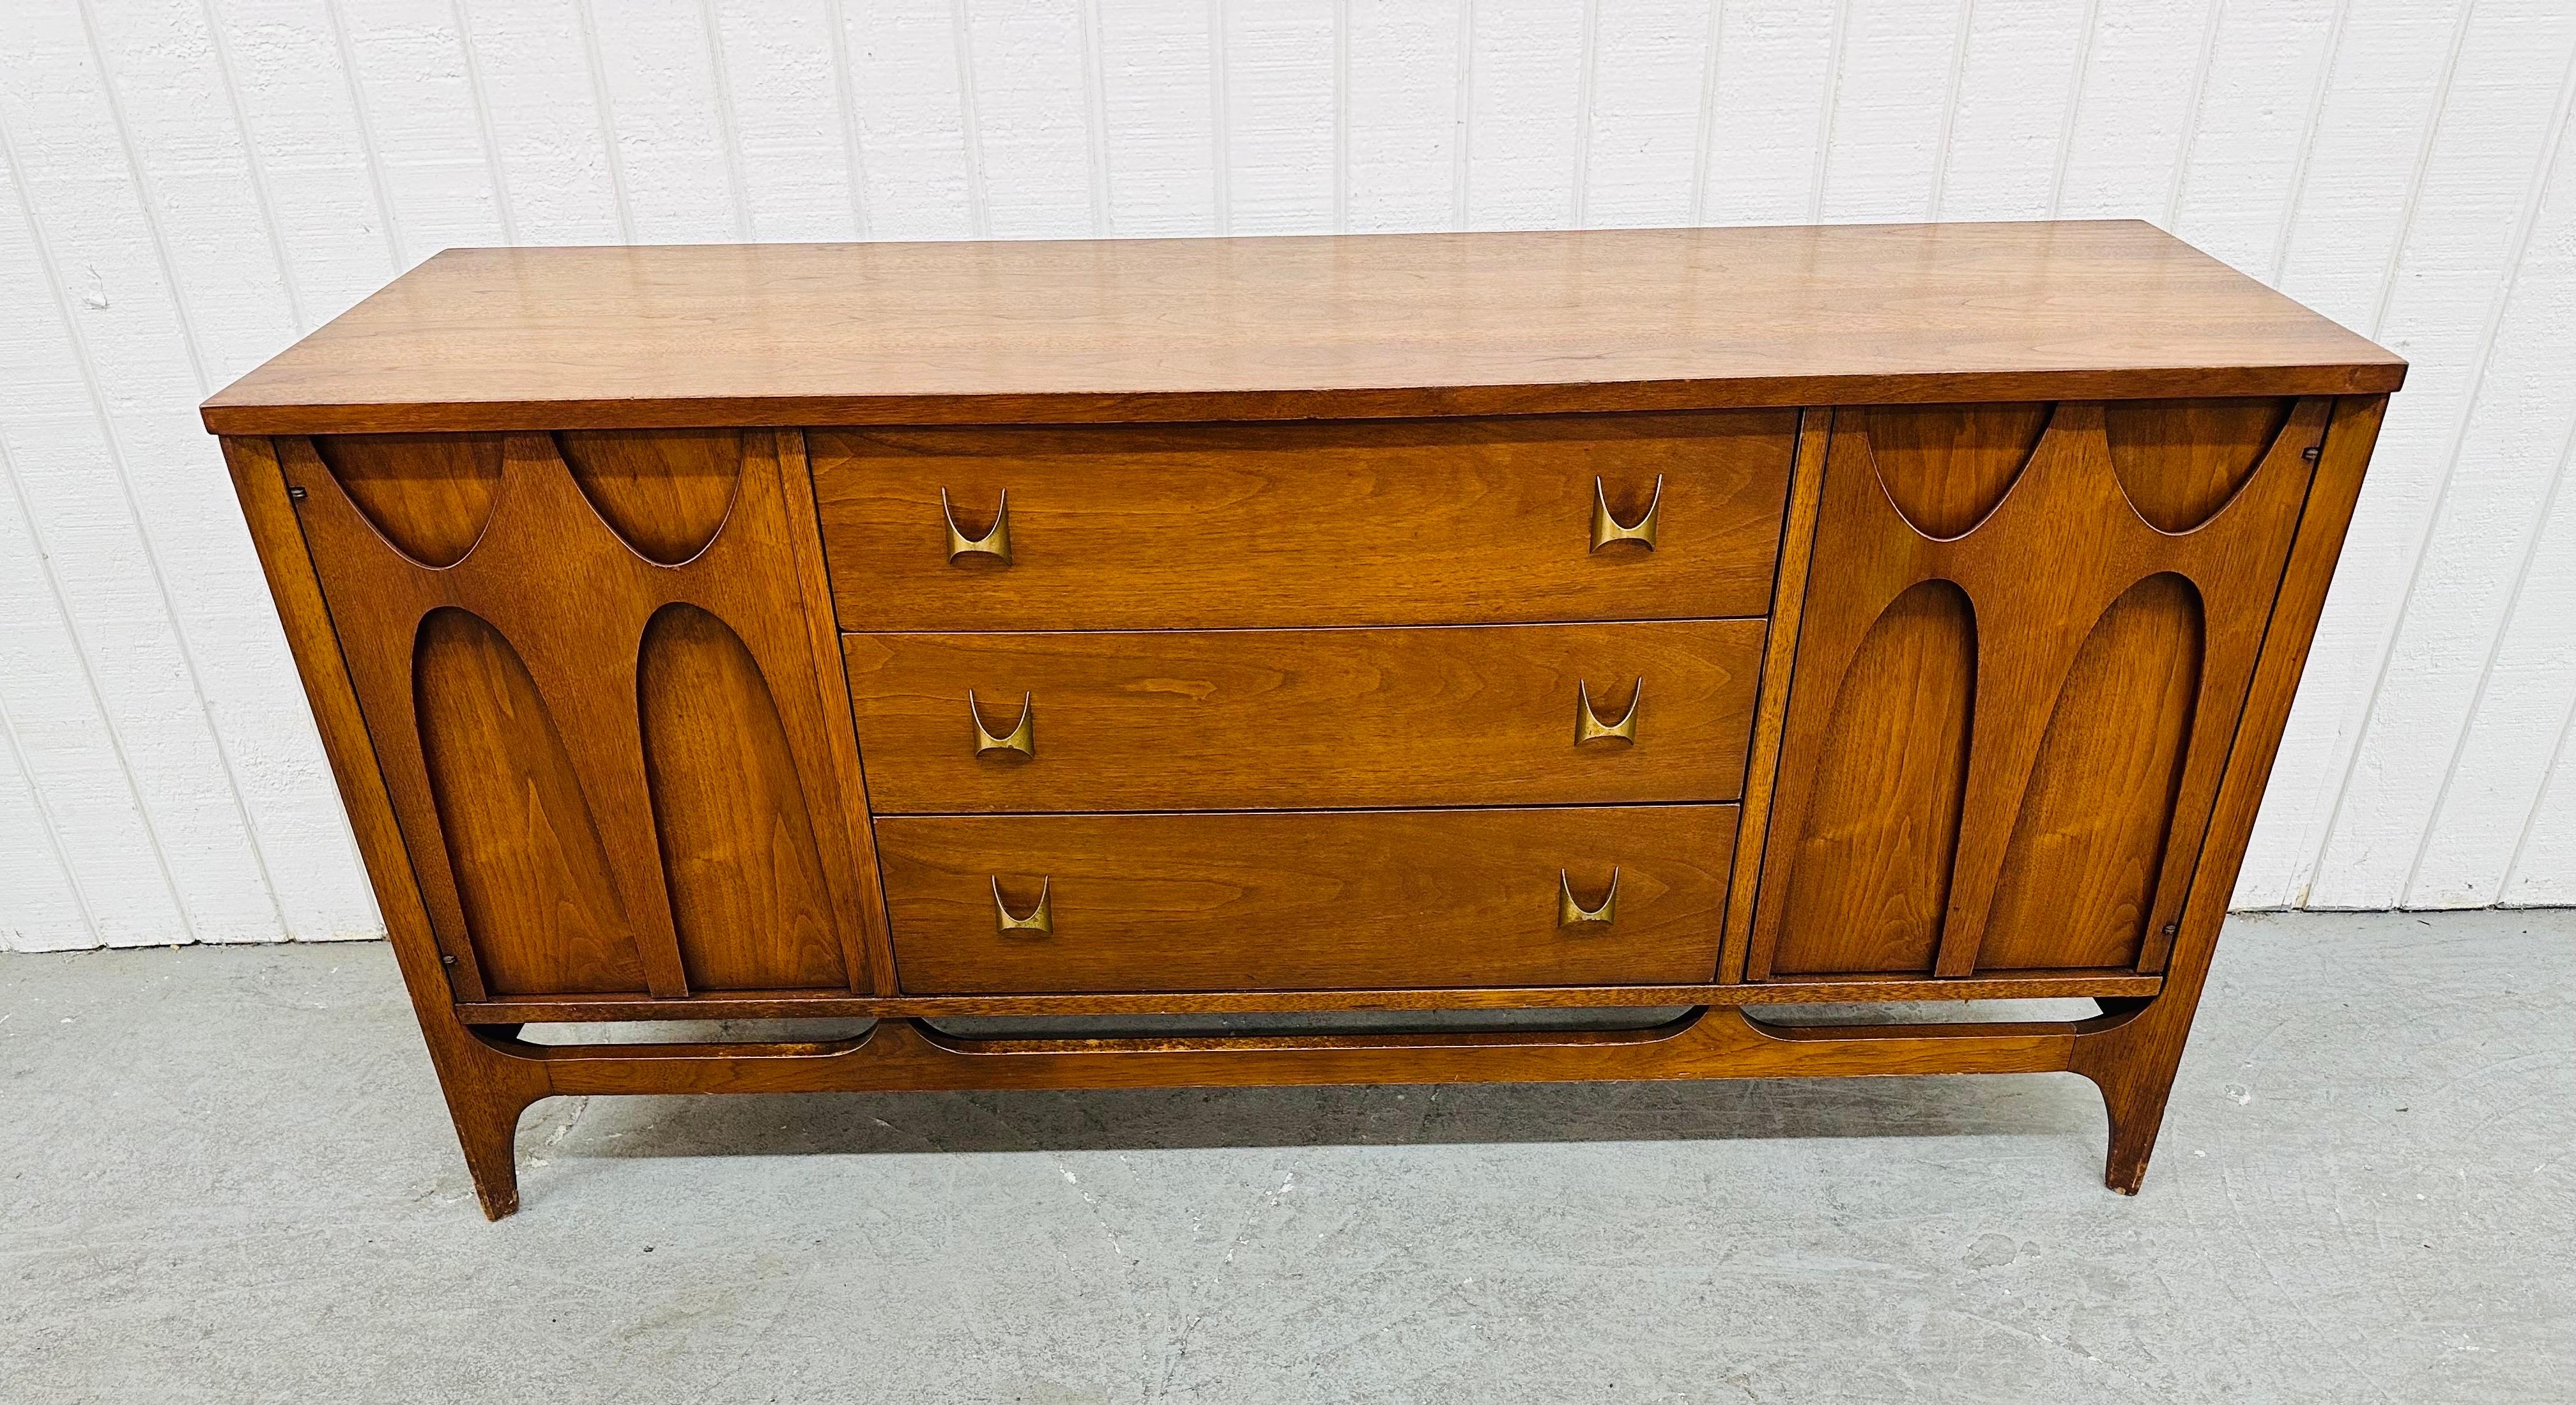 This listing is for a Mid-Century Modern Broyhill Brasilia Walnut Sideboard. Featuring a straight line design, two doors with the iconic sculpted Brasilia pulls, storage space, three drawers in the center, the original Brasilia hardware, and a